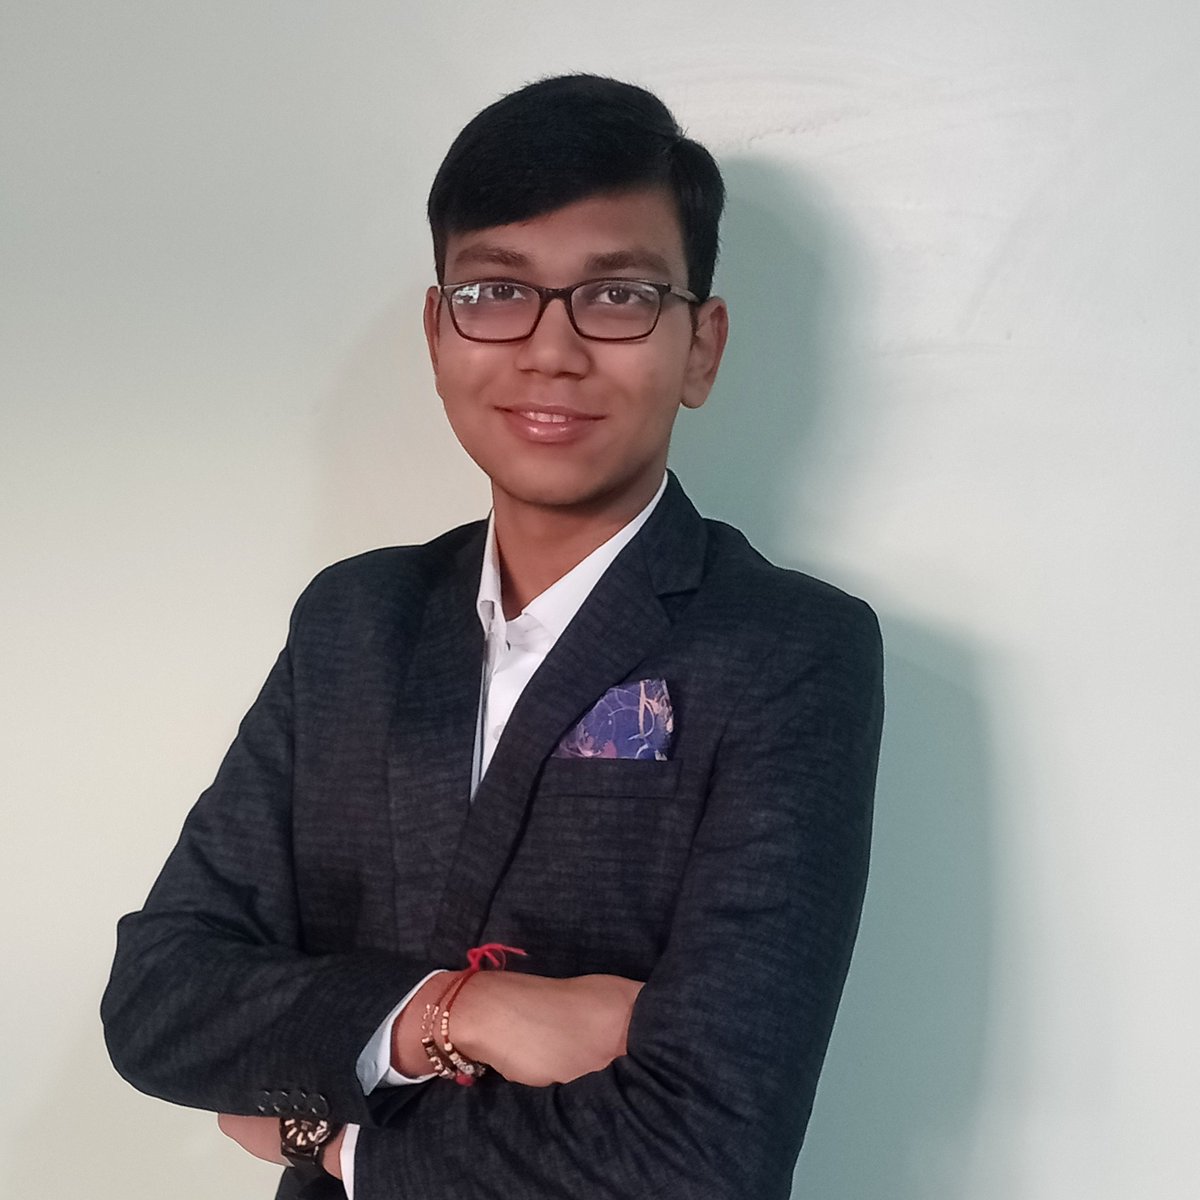 #NewProfilePic
#SuitUp #newsuit